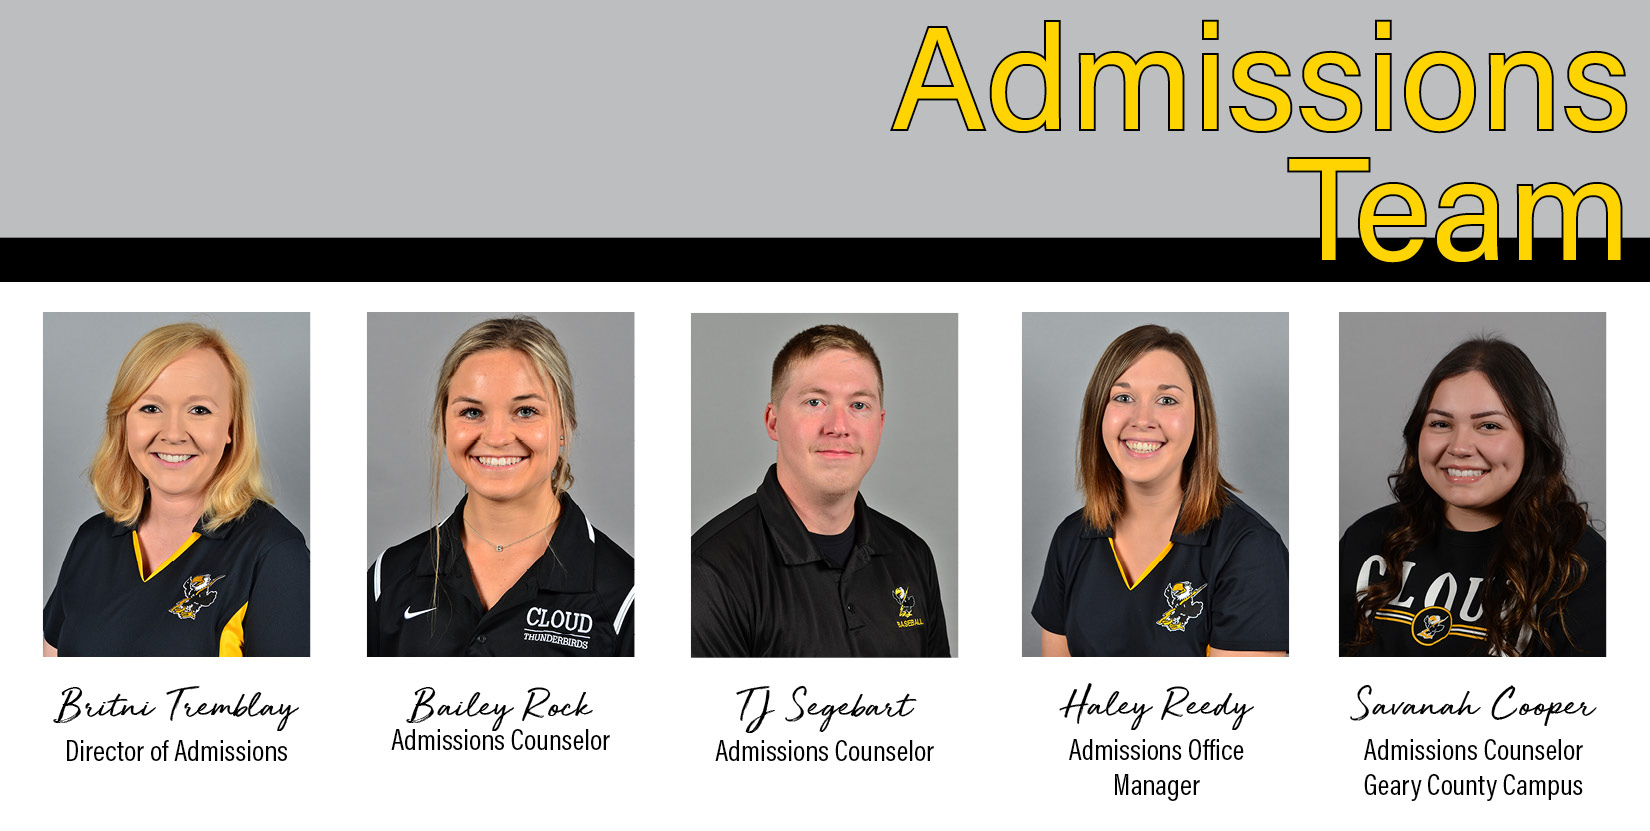 A photo of the members of the Admissions team.